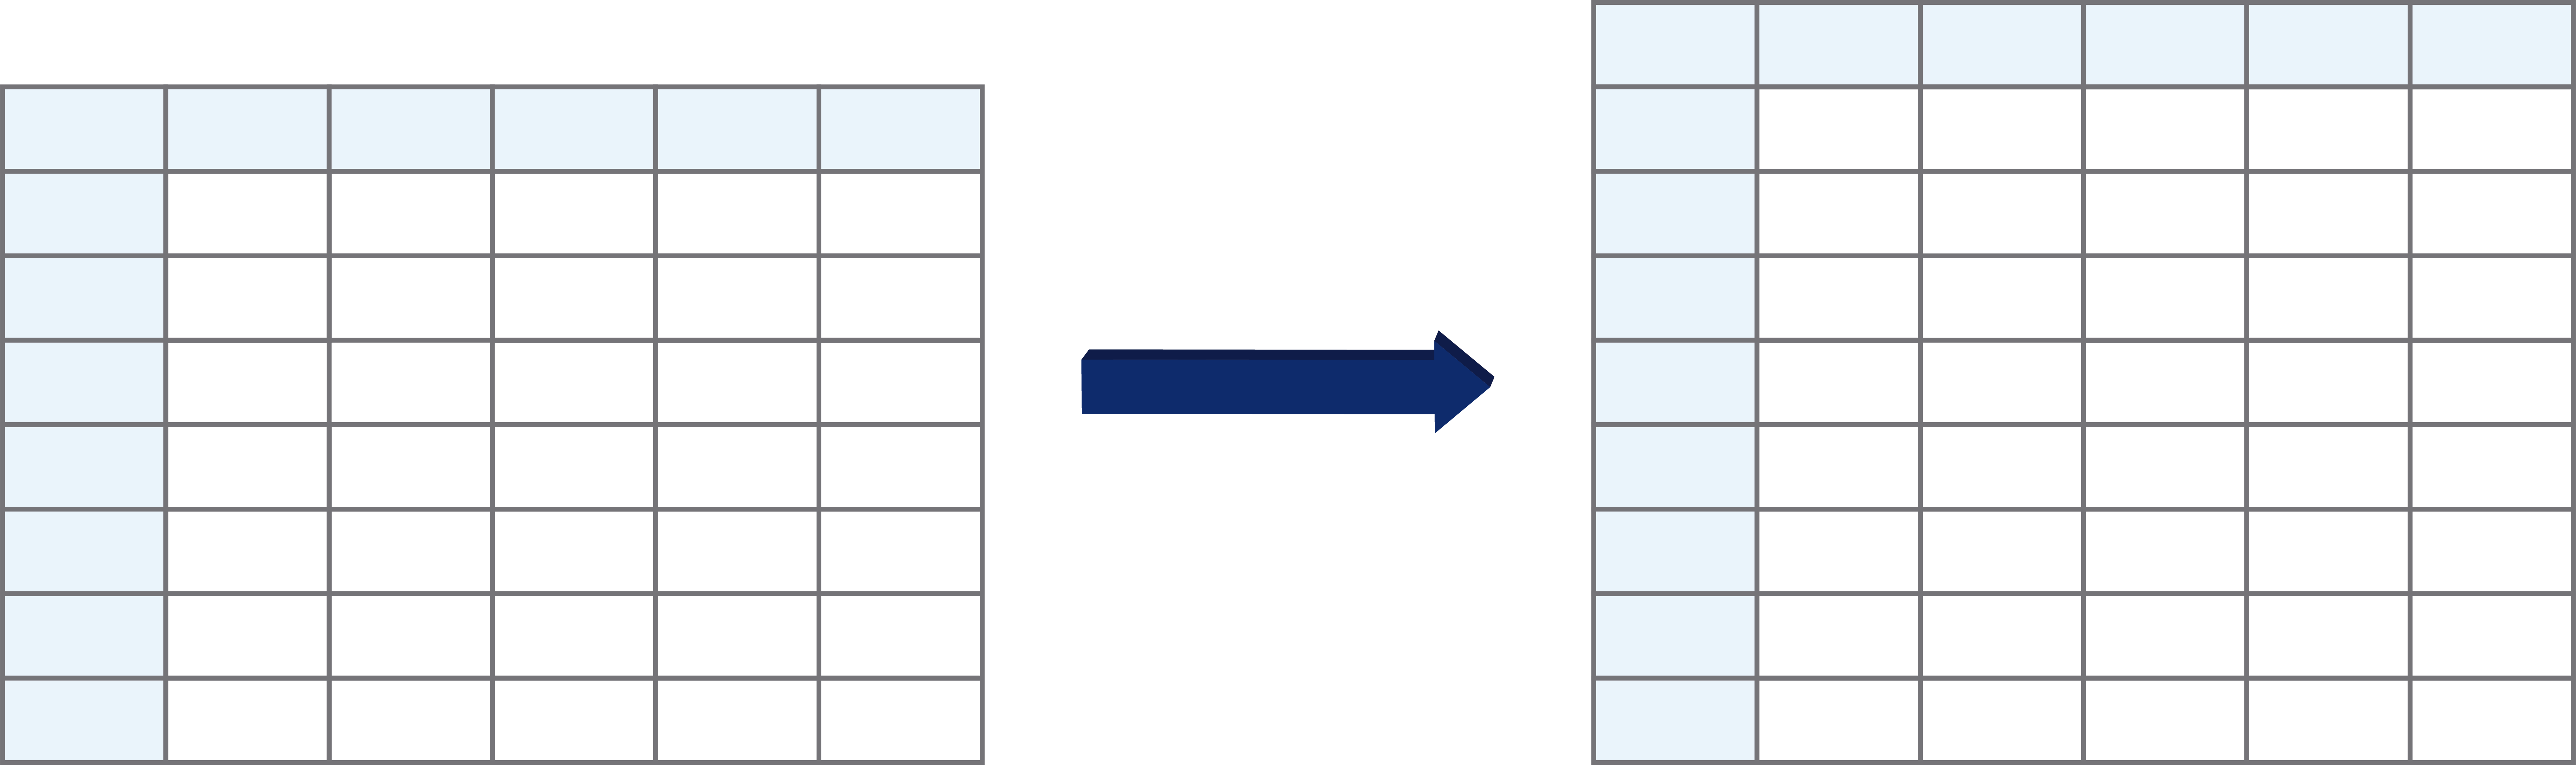 Figure  3: Binding rows of the data frame by taking $t$ and adding an extra row.